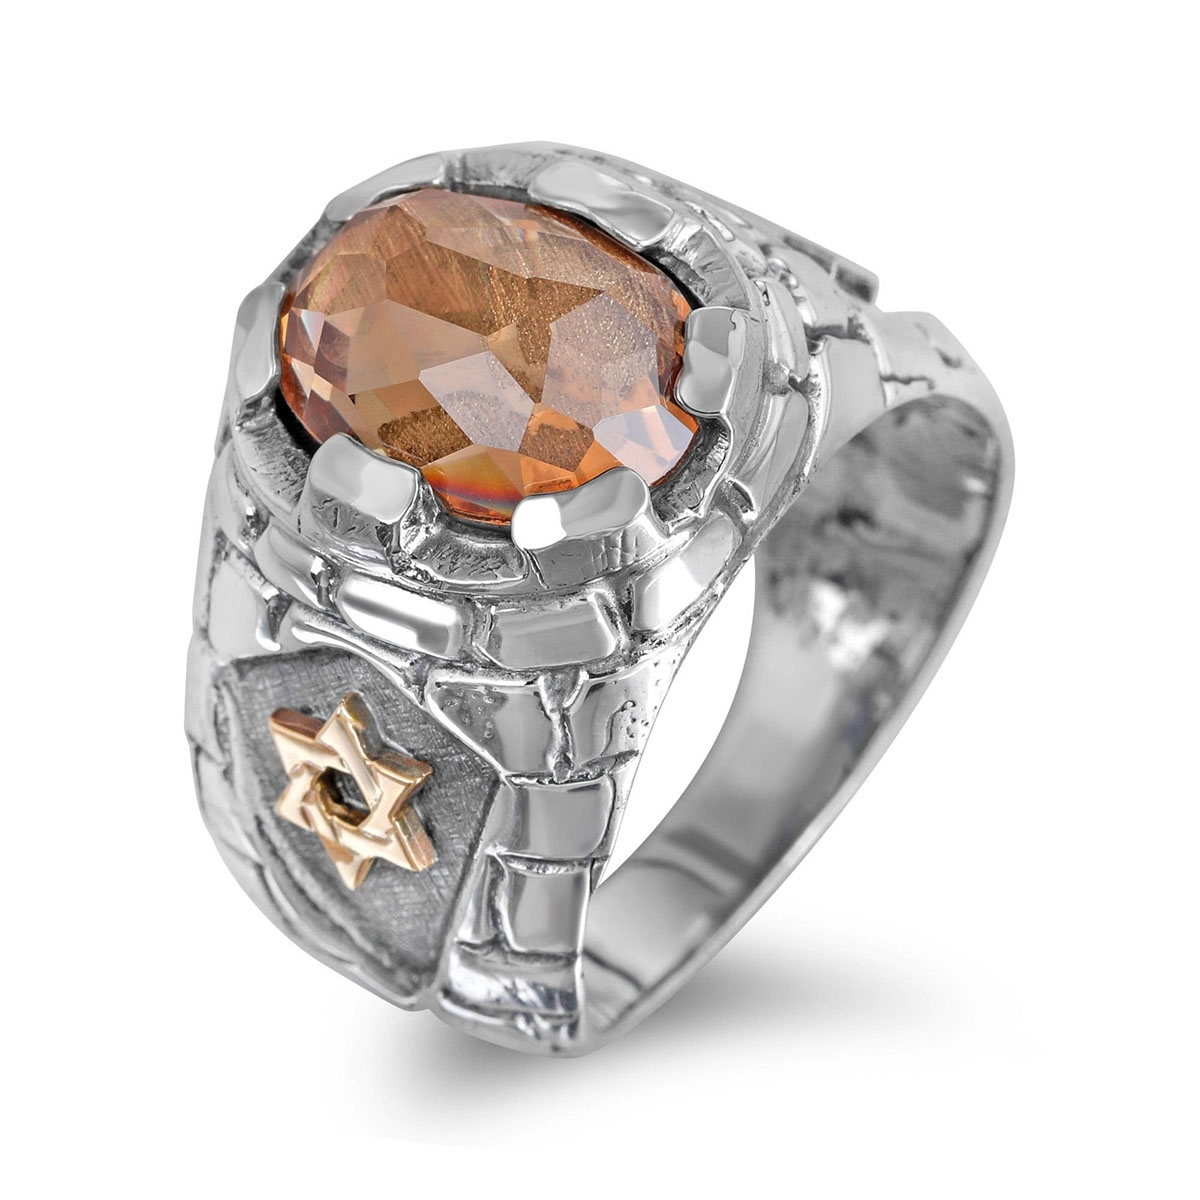 Sterling Silver Jerusalem Walls Ring with Champagne Stone and Gold Starts of David - 1